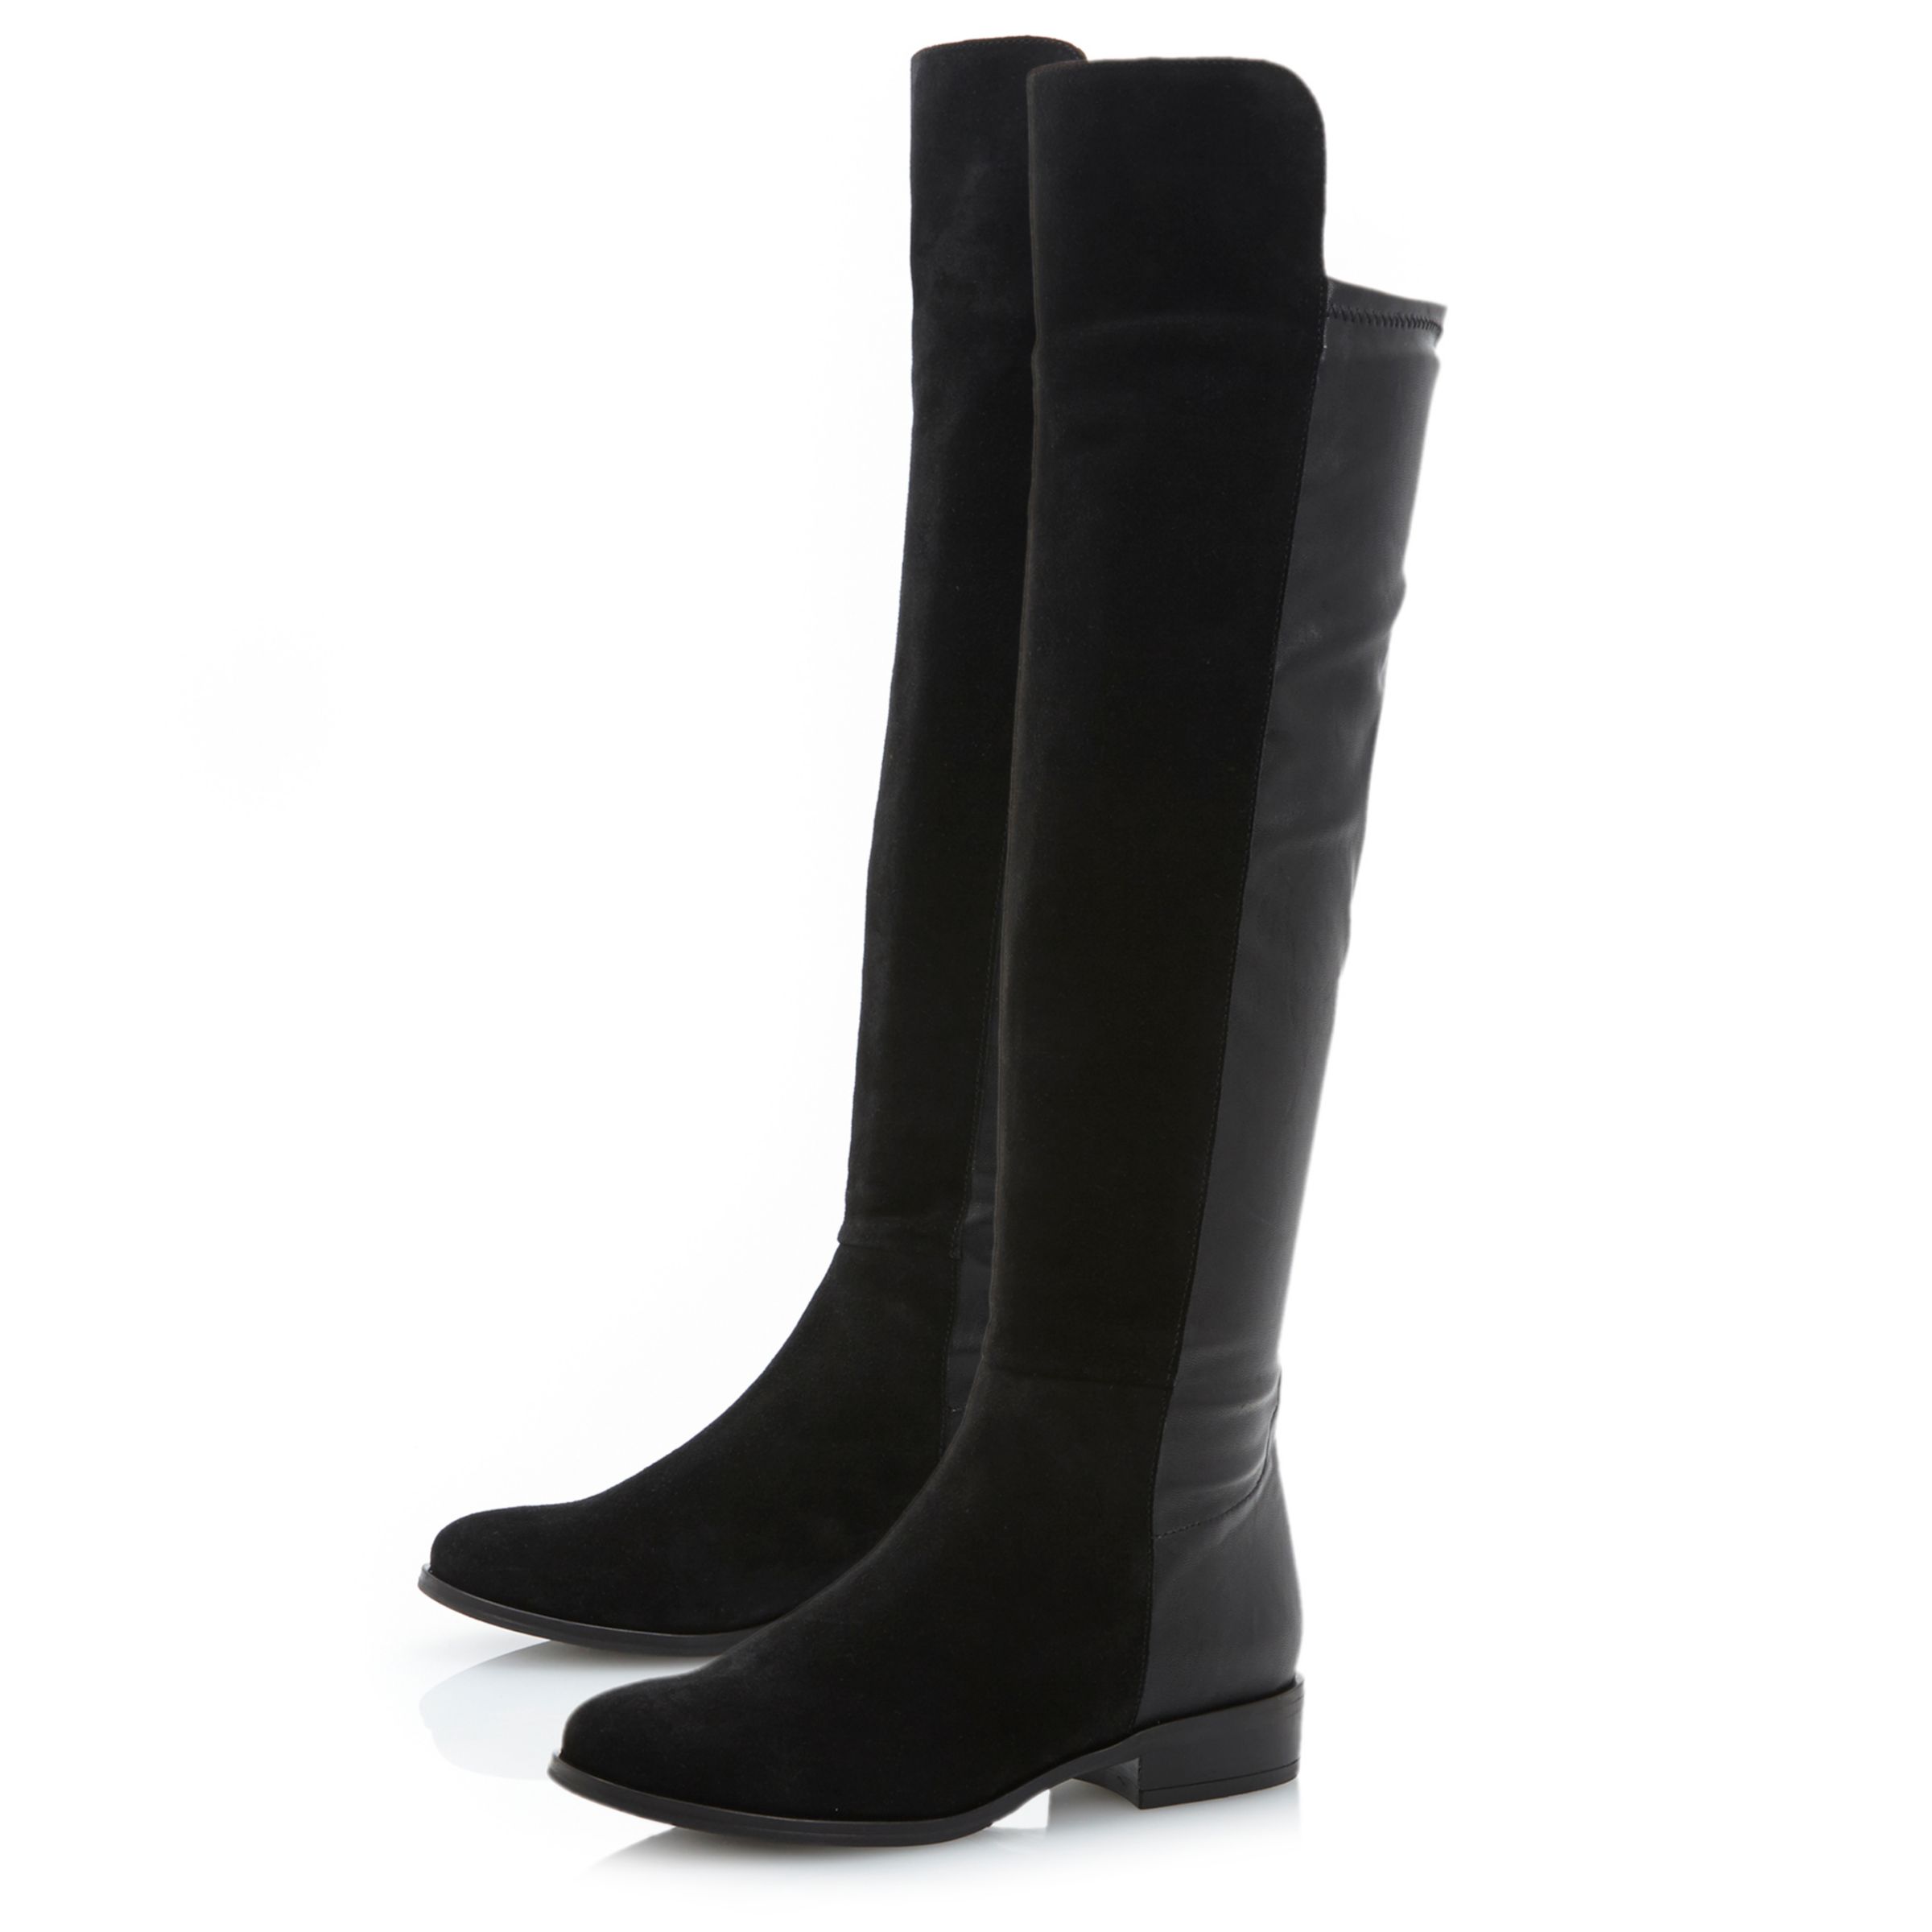 Dune Trish Over the Knee Boots, Black Suede